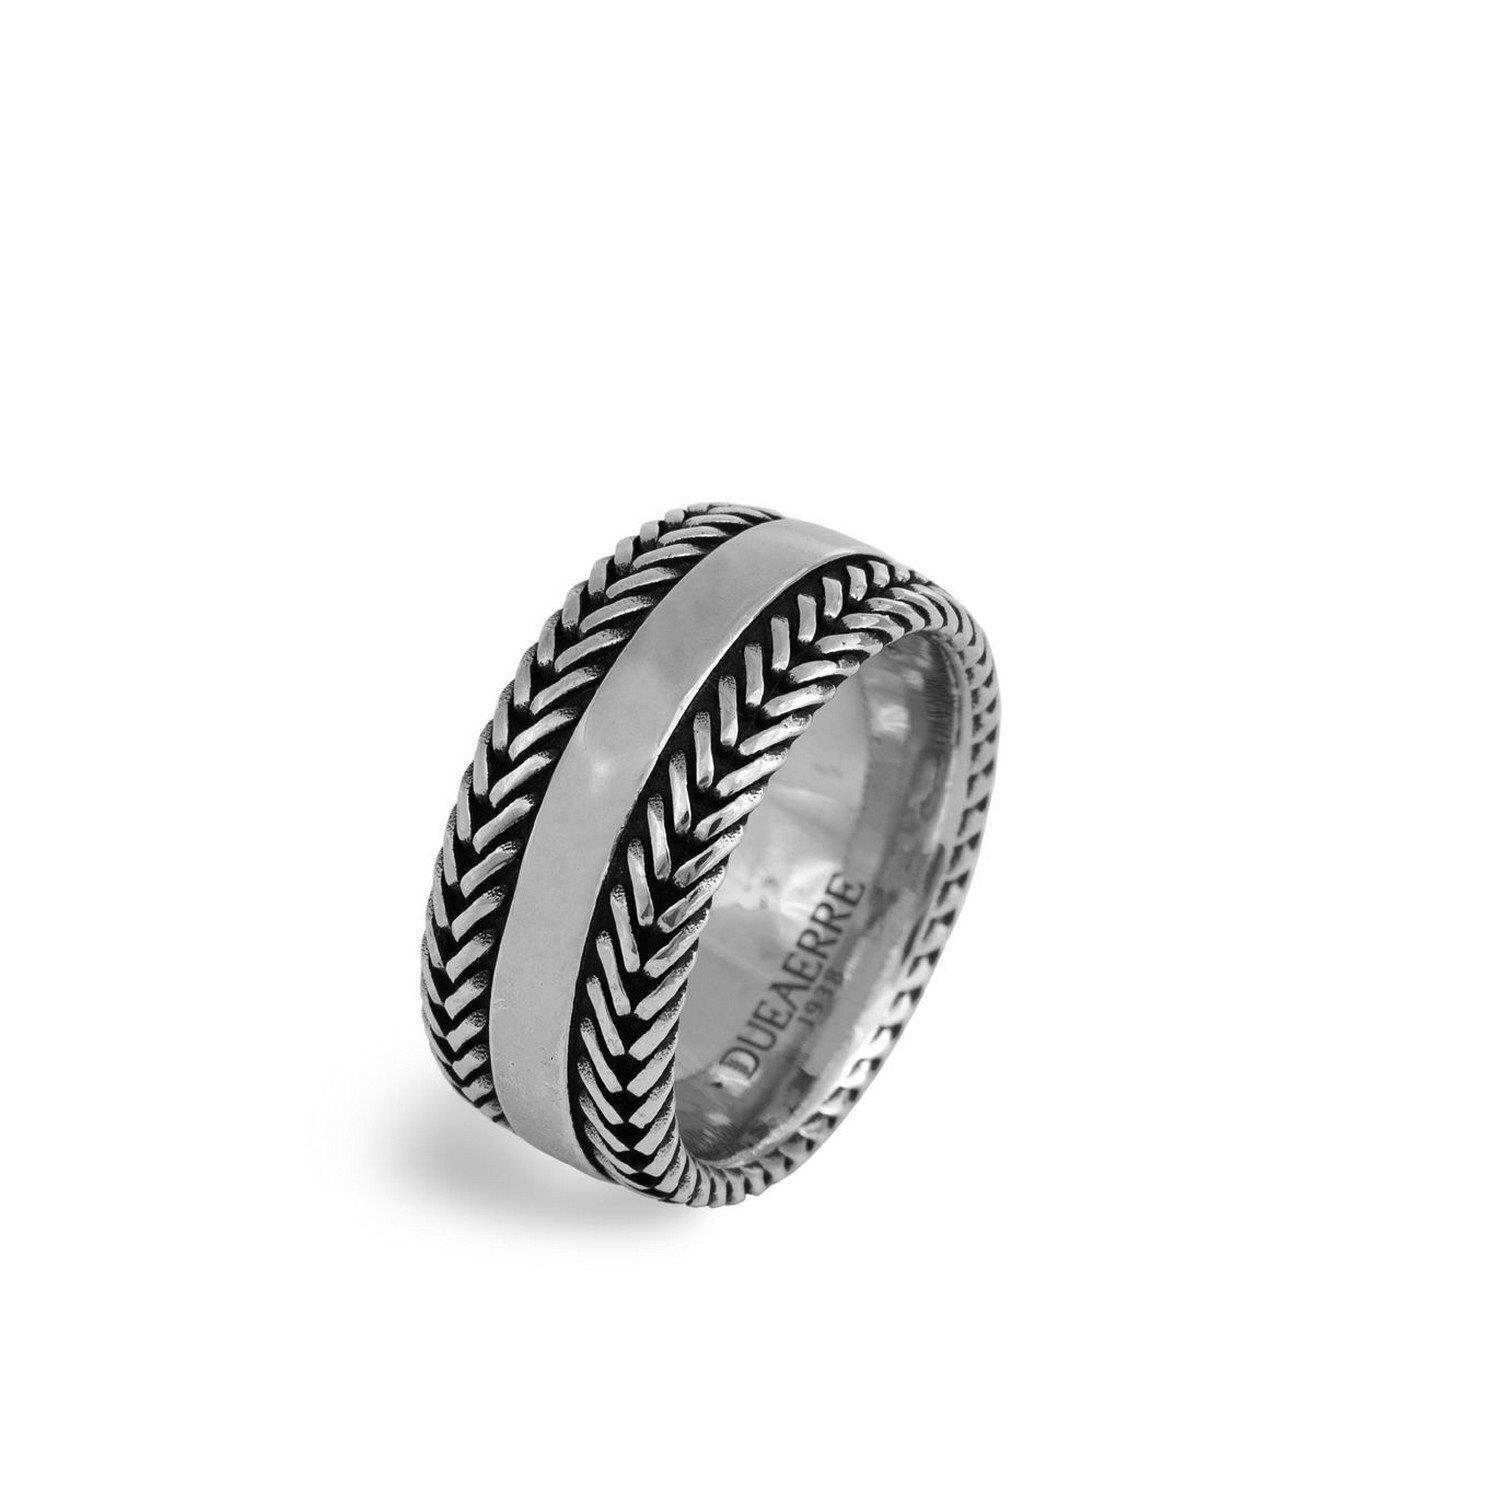 Silver men's band ring - DUEAERRE 1938